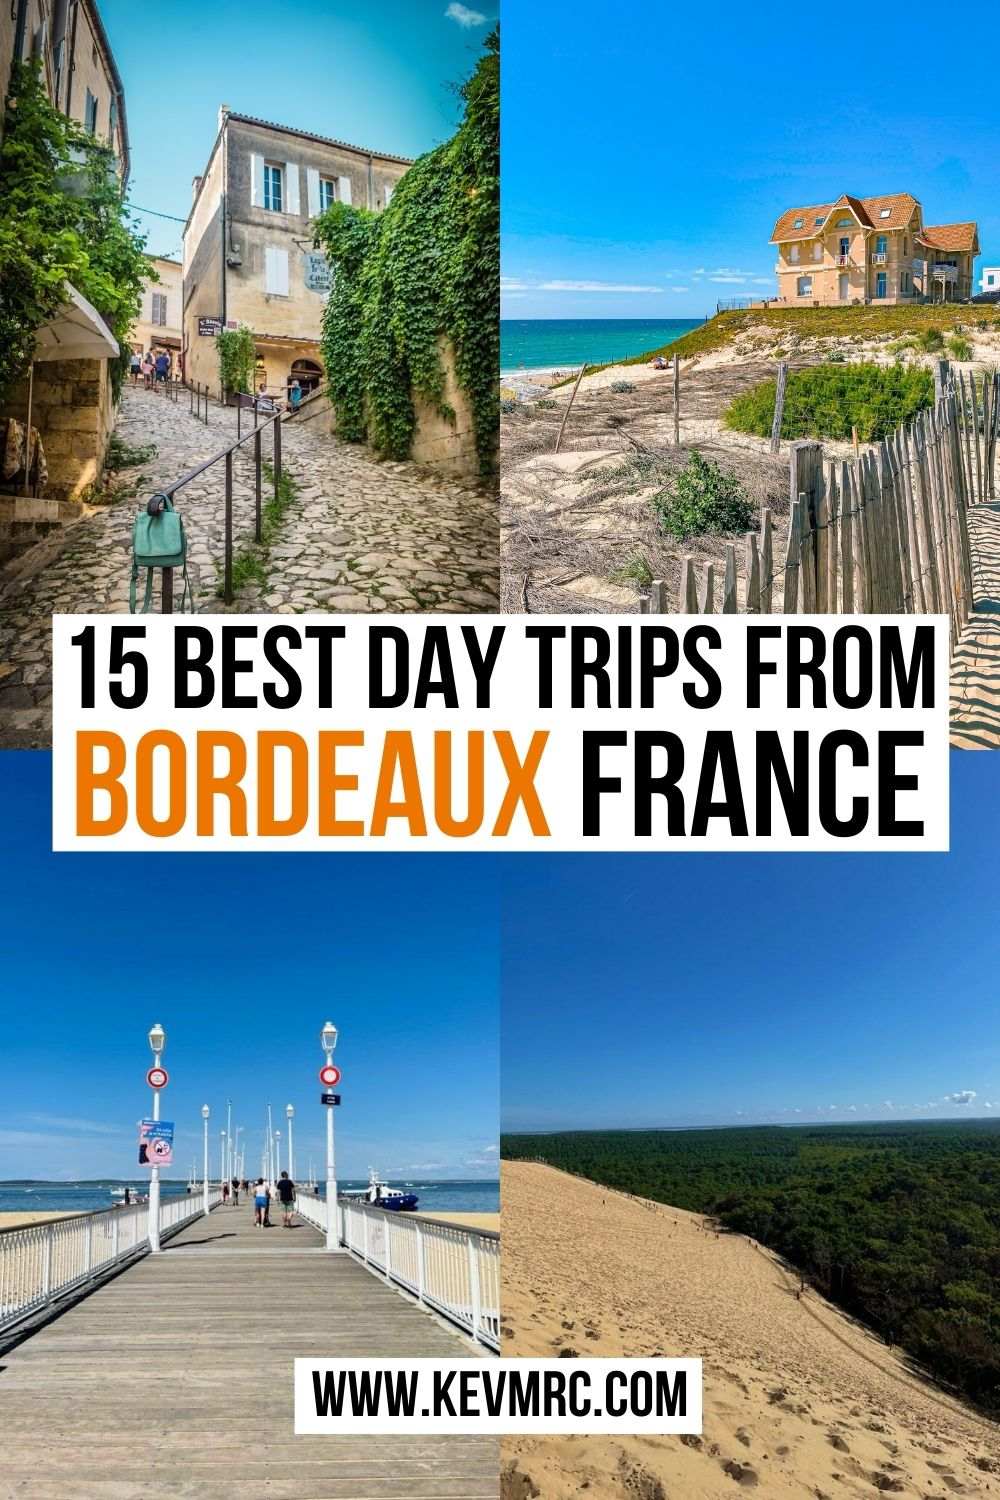 Looking for a day trip from Bordeaux? Here are the 15 best day trips from Bordeaux that are less than 2 hours away, either by train or car. bordeaux travel guide | visit bordeaux